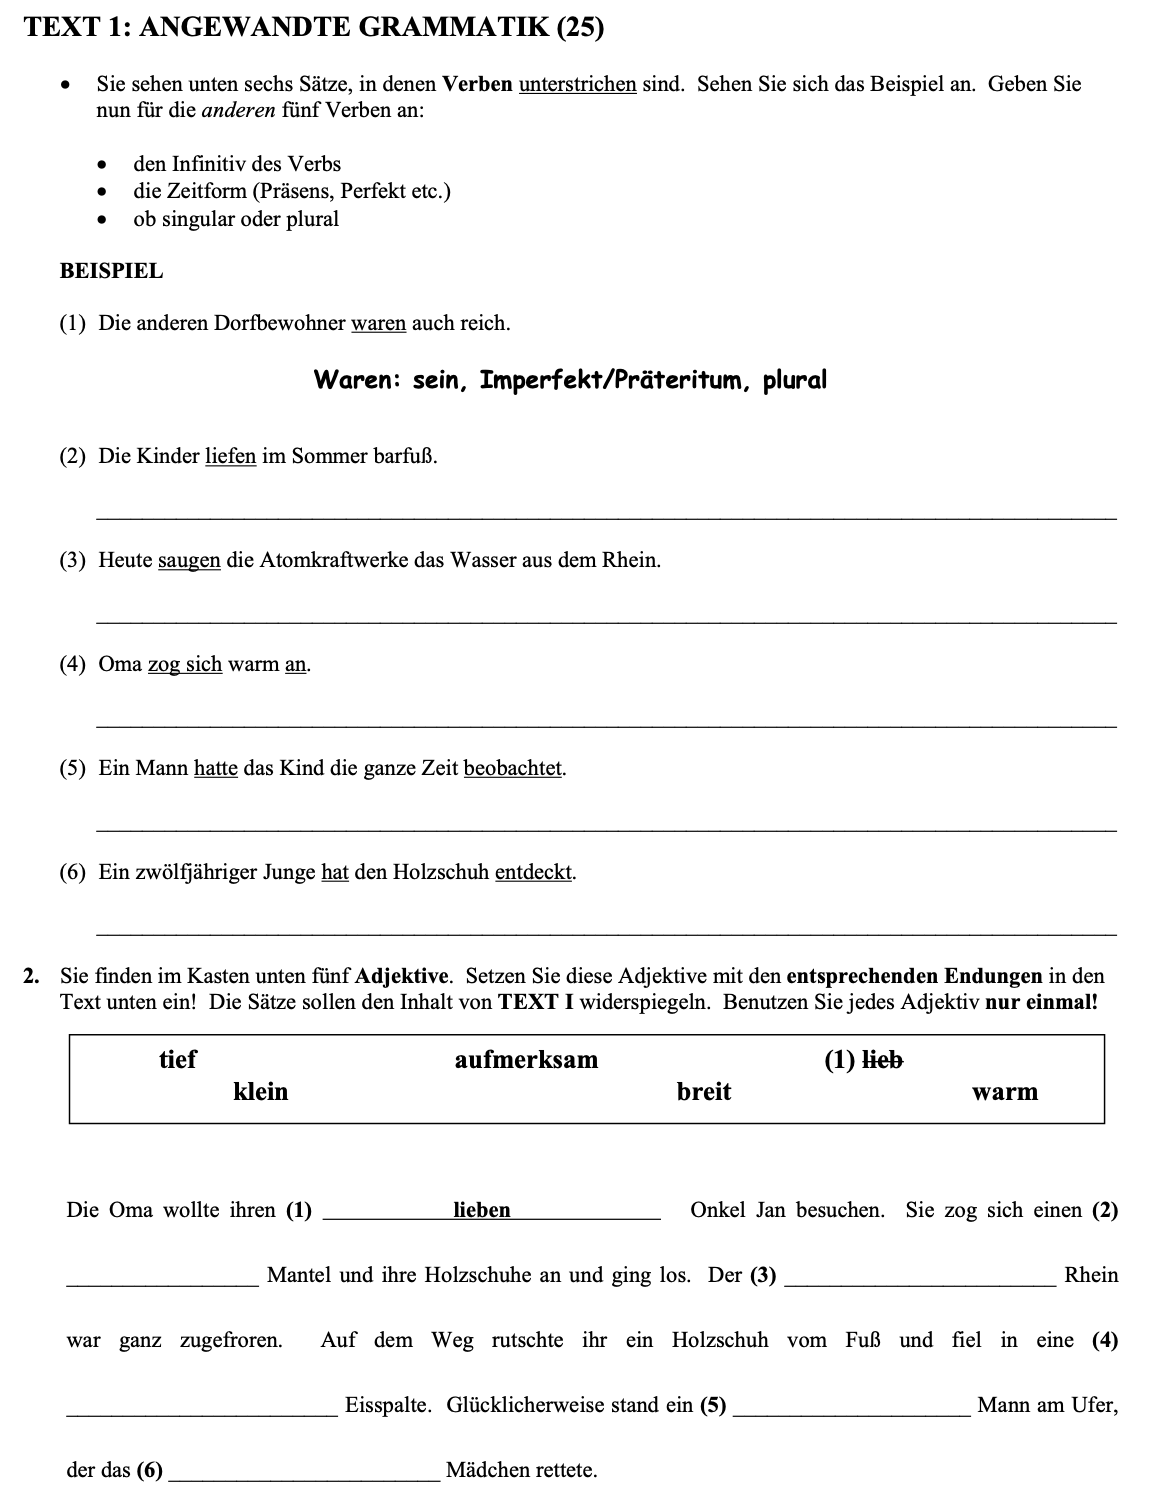 an image of the question 2002 Text I Angewandte Grammatik which is about the topic grammatik and the subject is Leaving Certificate german